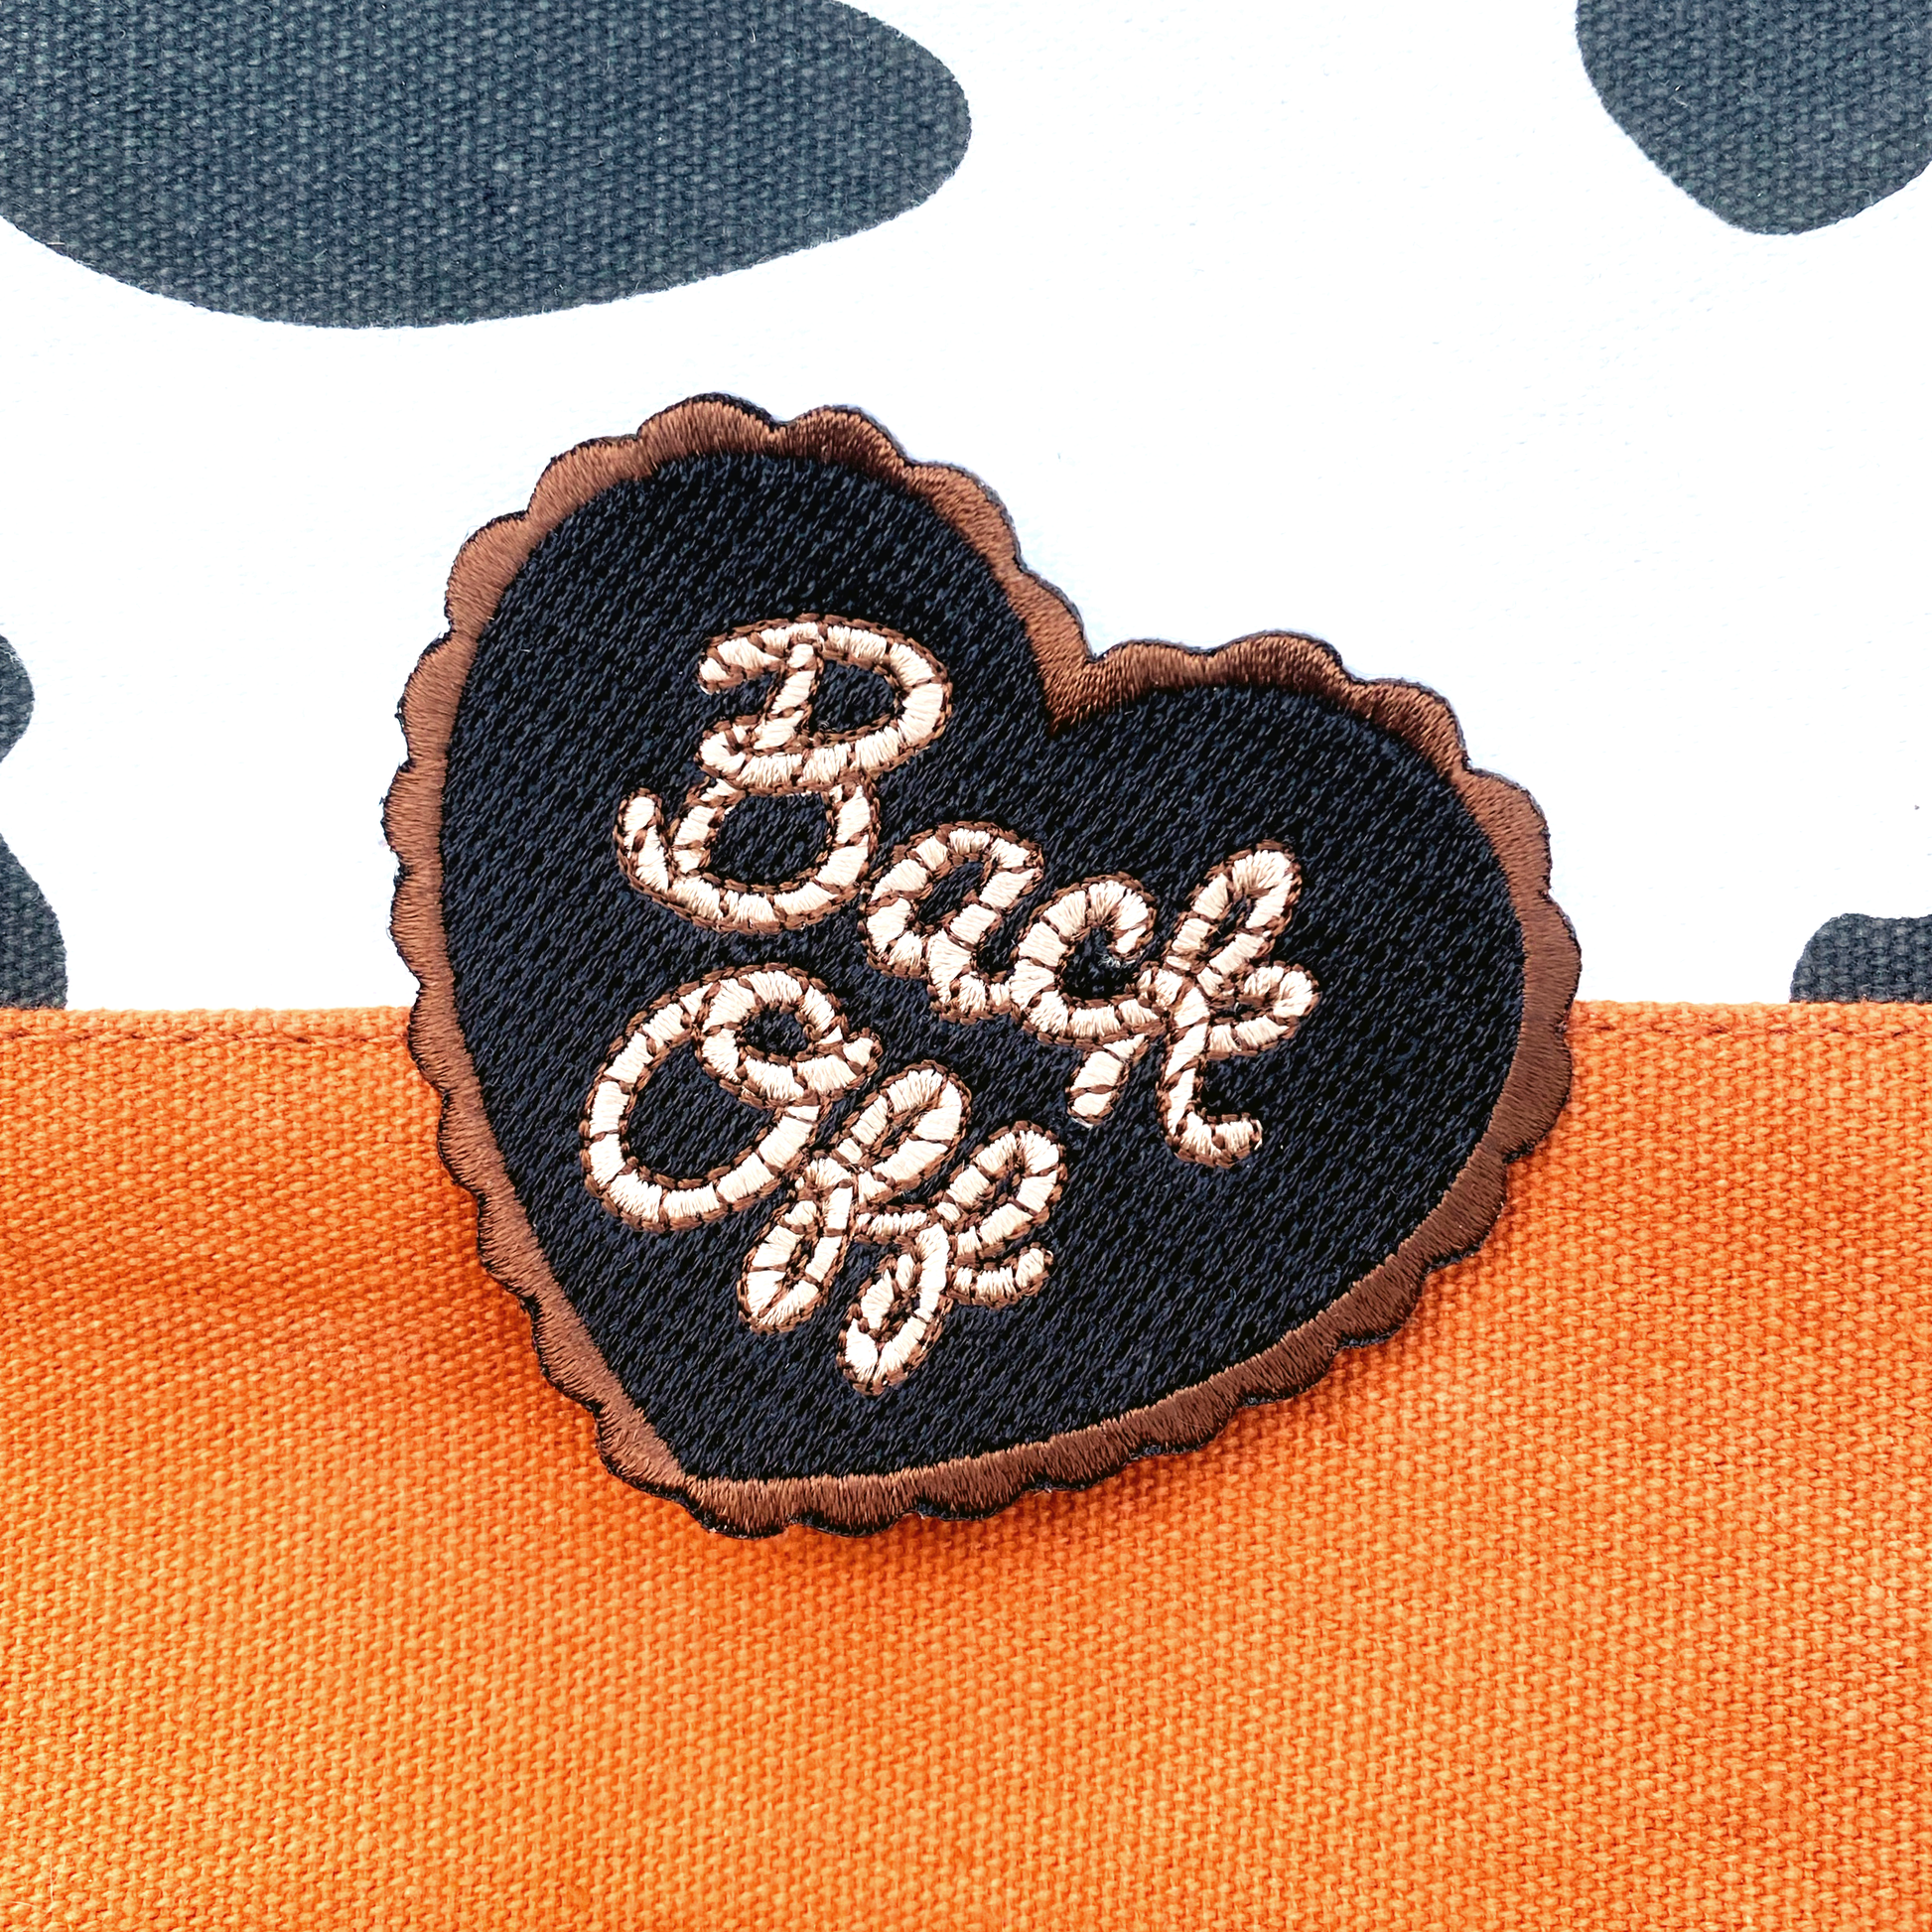 Black and yellow heart shaped embroidered patch with the quote "Back Off" in cursive photographed against a black and white cow print background